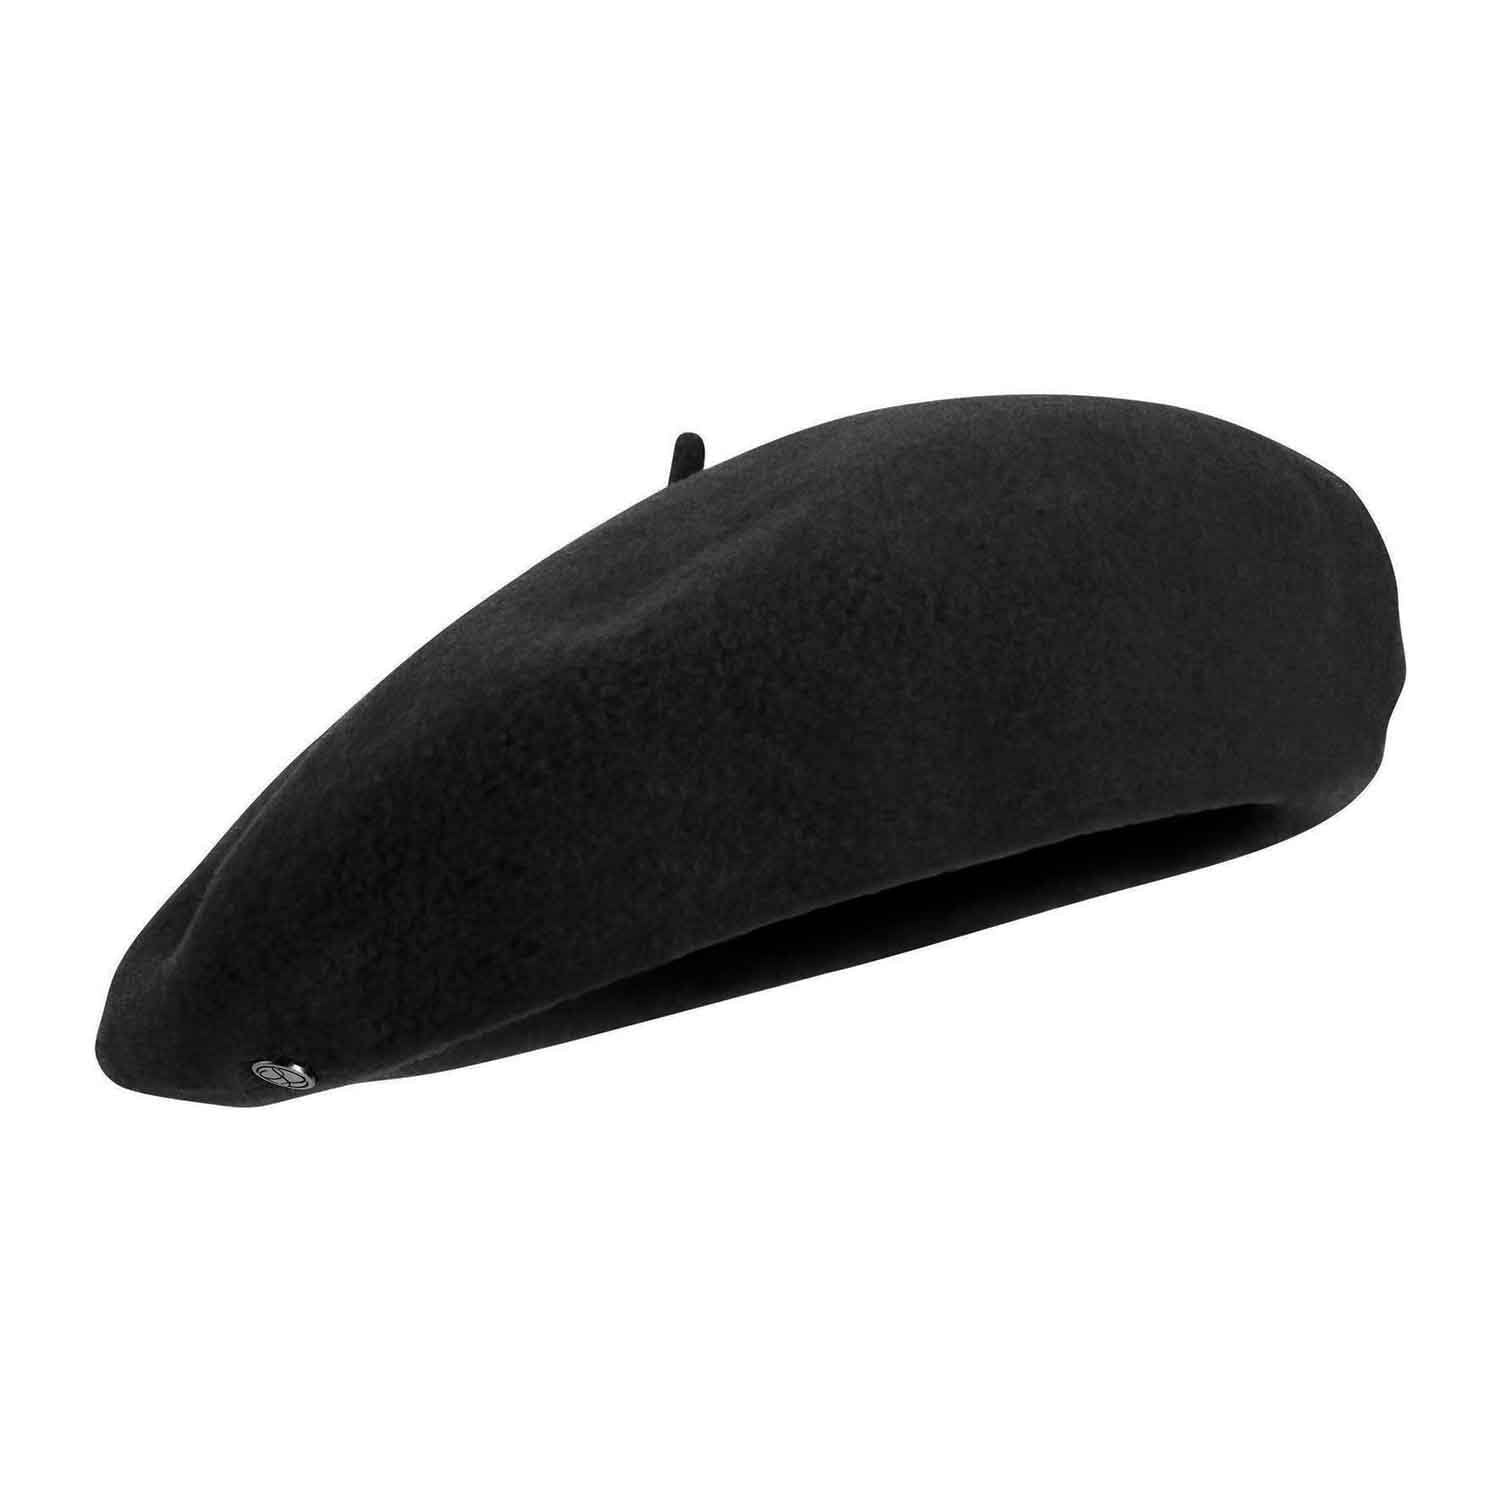 Laulhere Vrai Basque 9-1/2" anglobasque wool beret